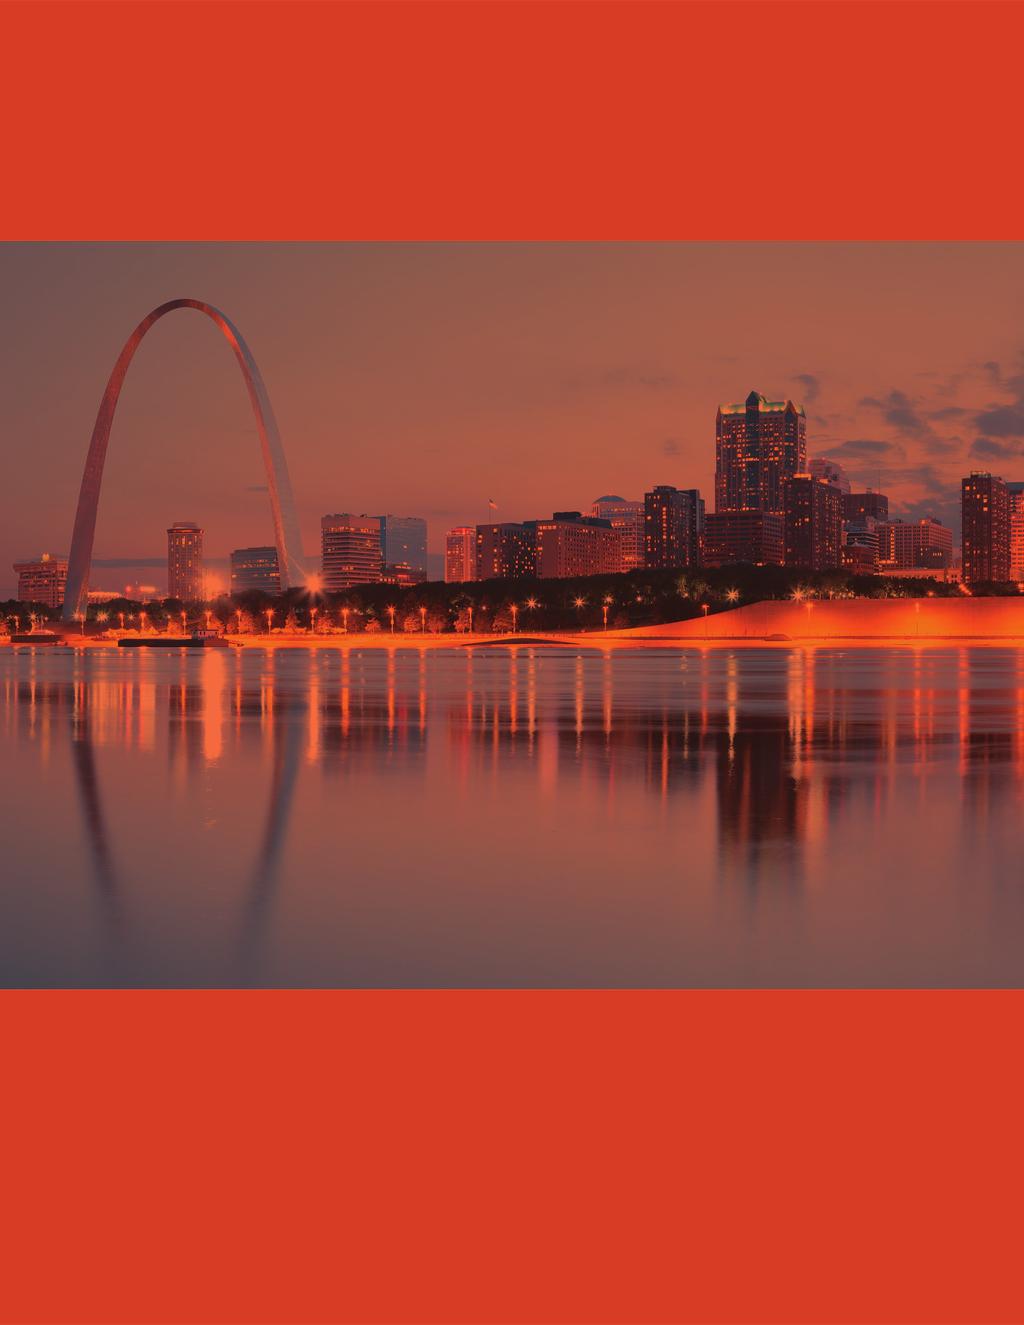 2017 ANNUAL 2017 ANNUAL SPONSORSHIP OPPORTUNITIES PMBA invites your organization to join us for the 2017 Annual Conference in St. Louis, MO on.